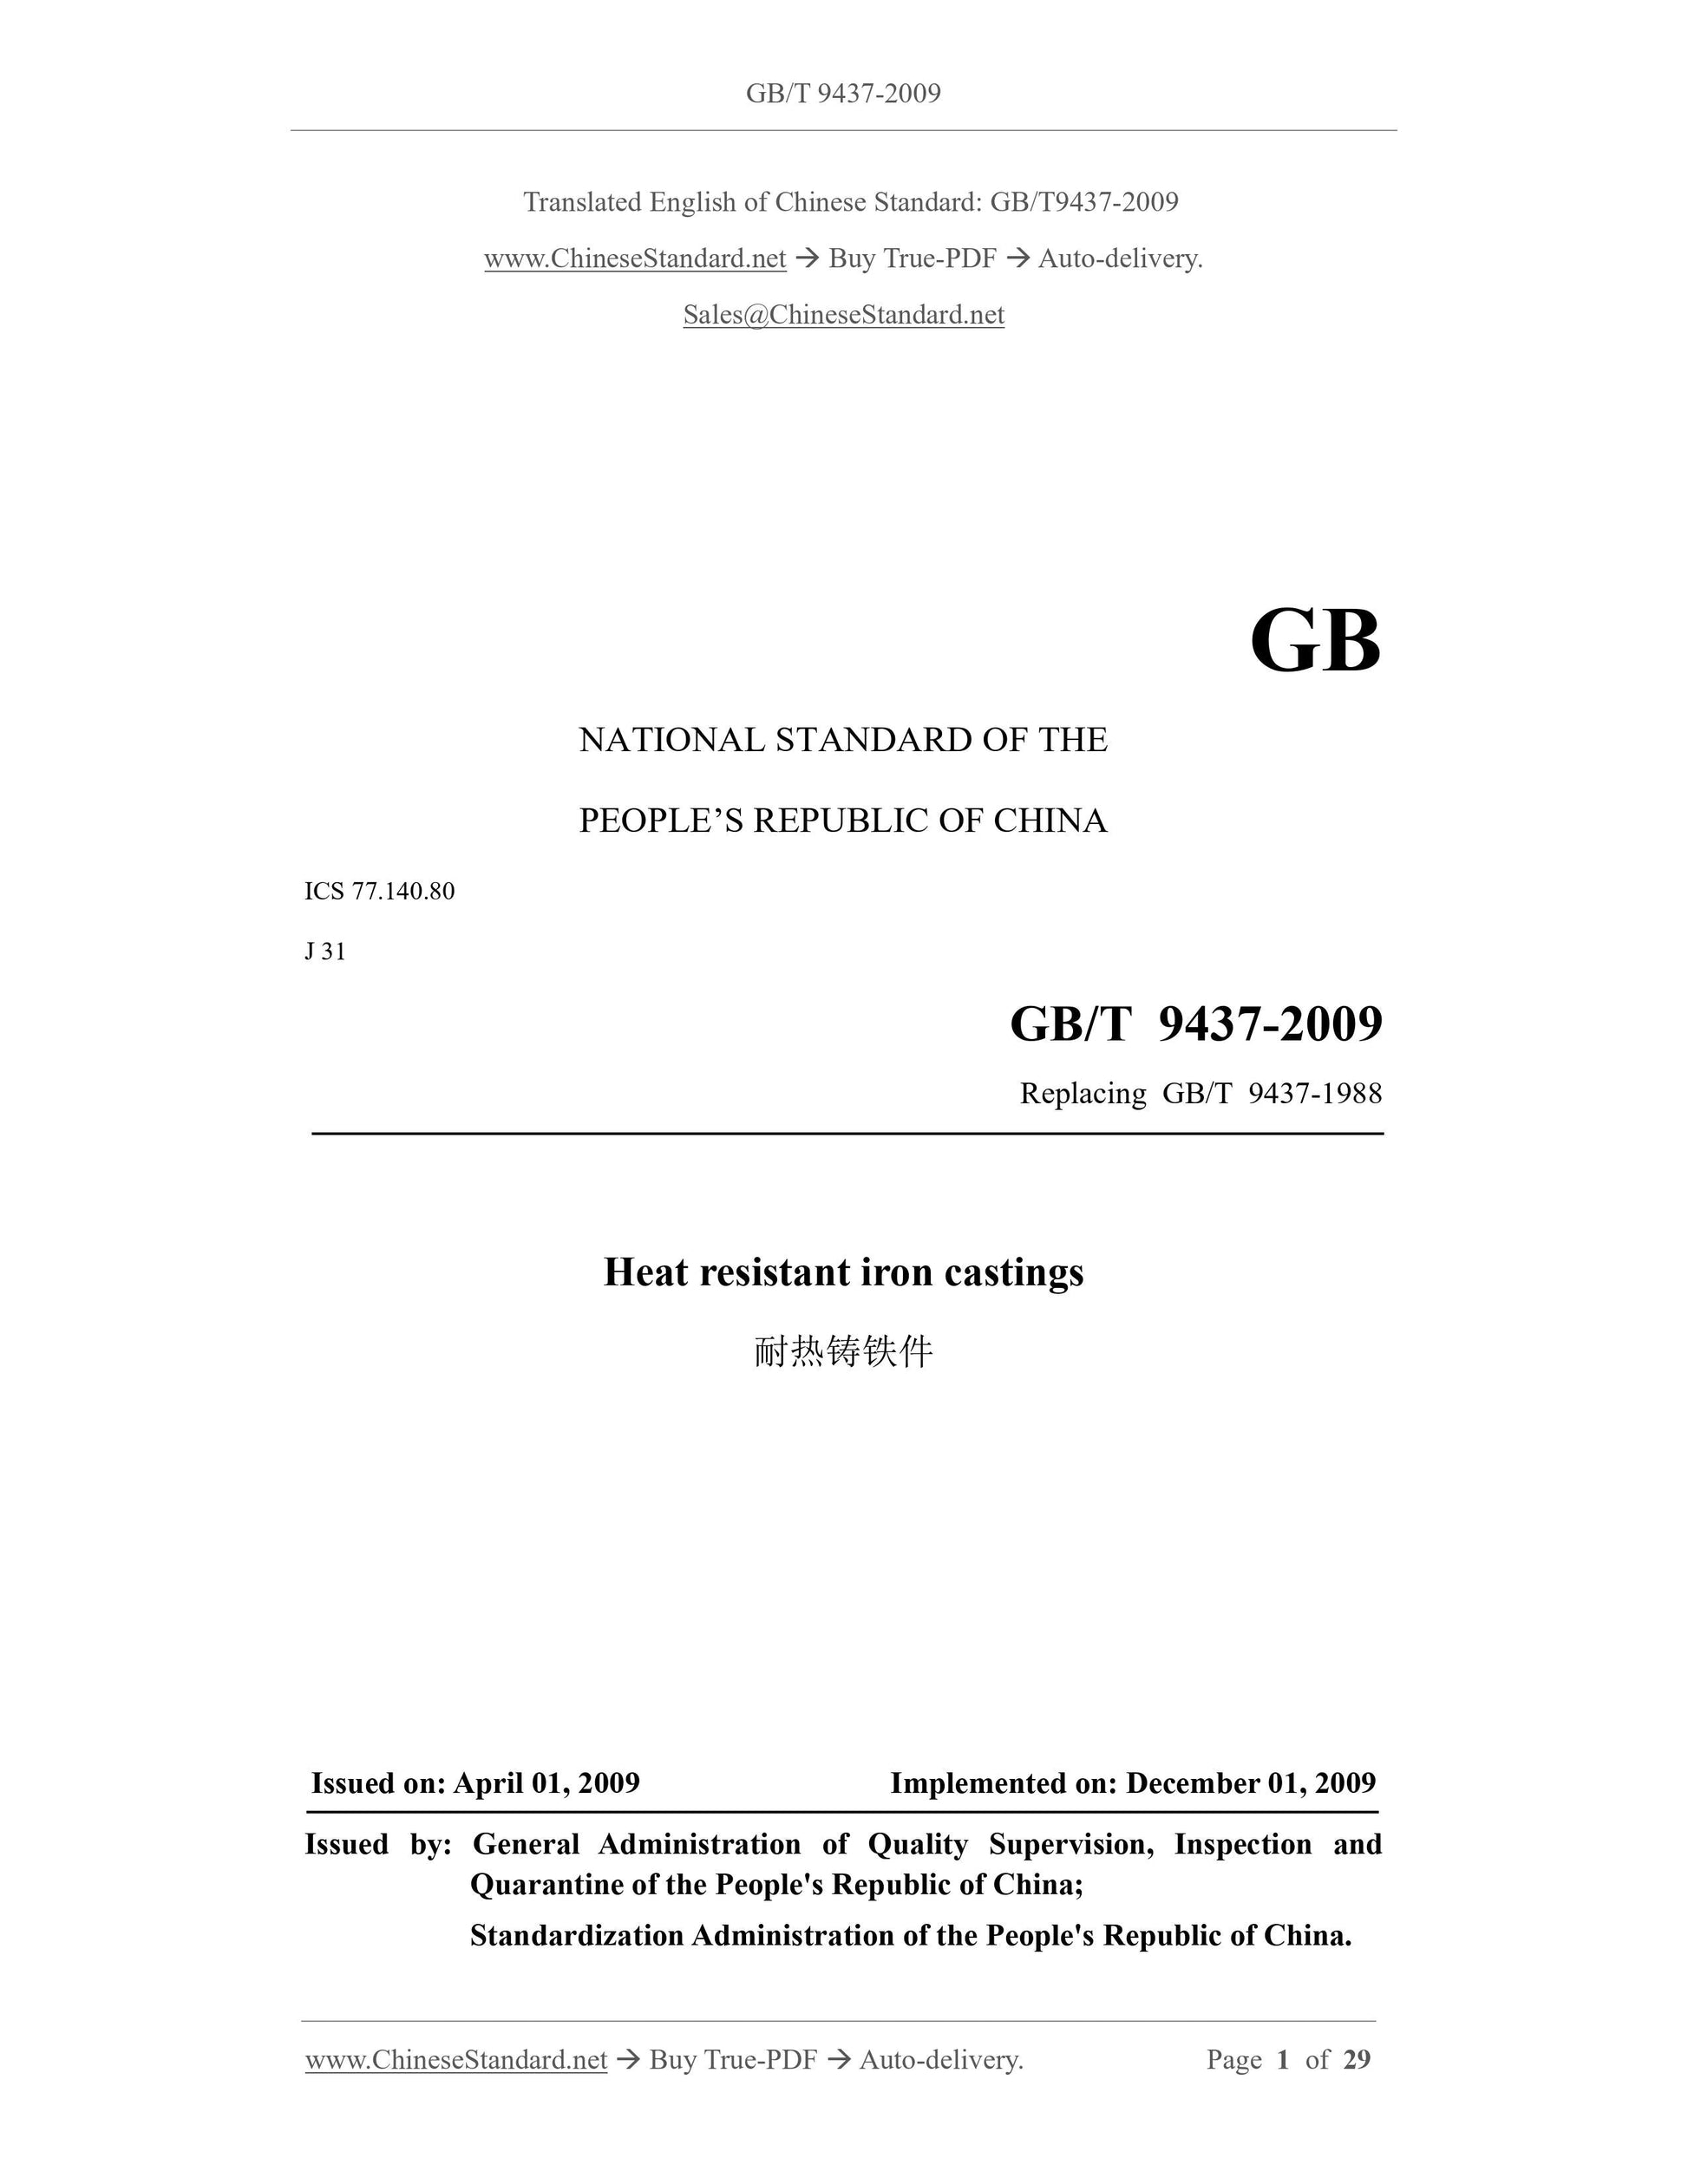 GB/T 9437-2009 Page 1